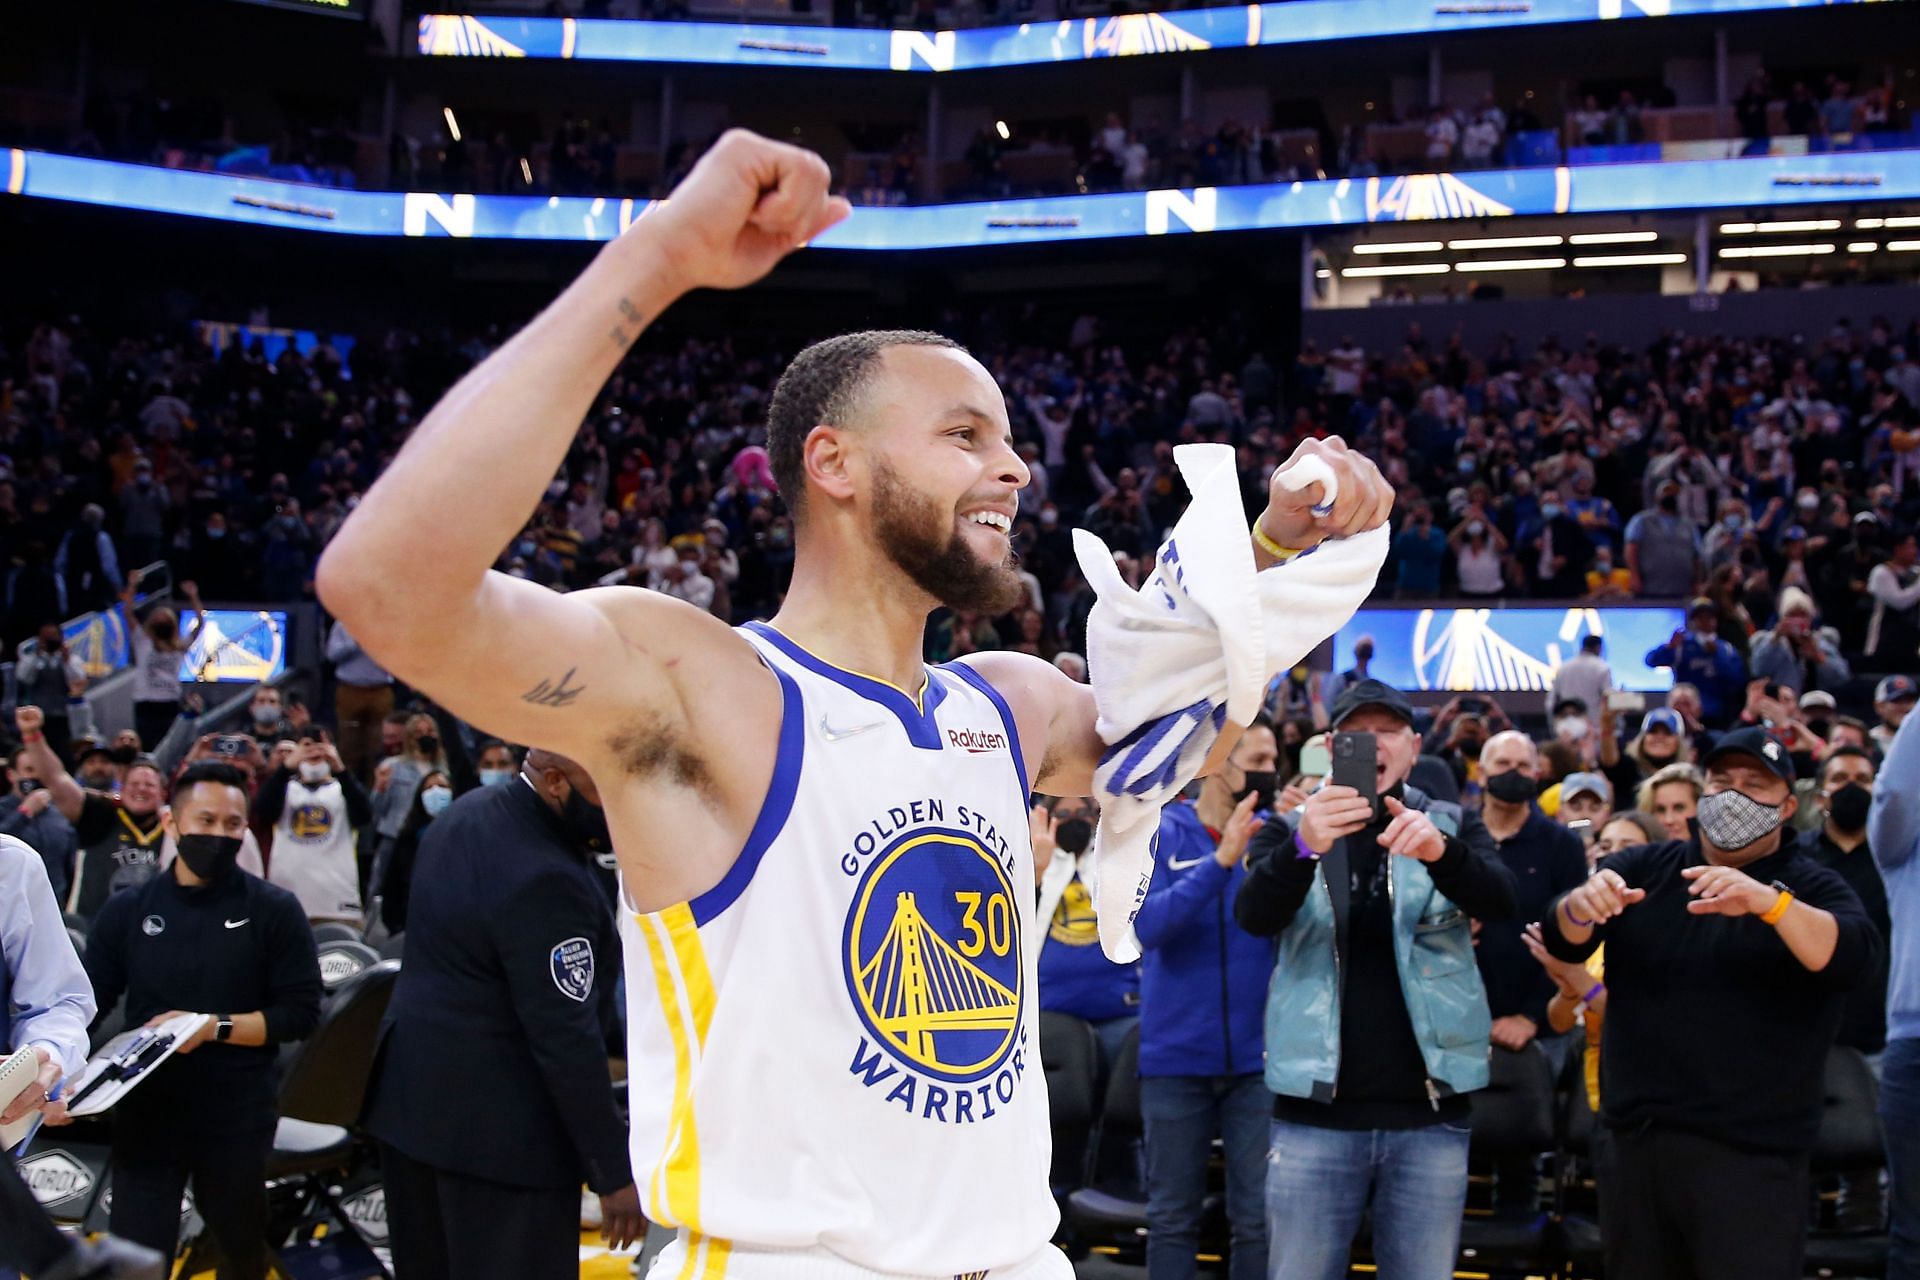 Steph Curry celebrates his game-winning buzzer-beater